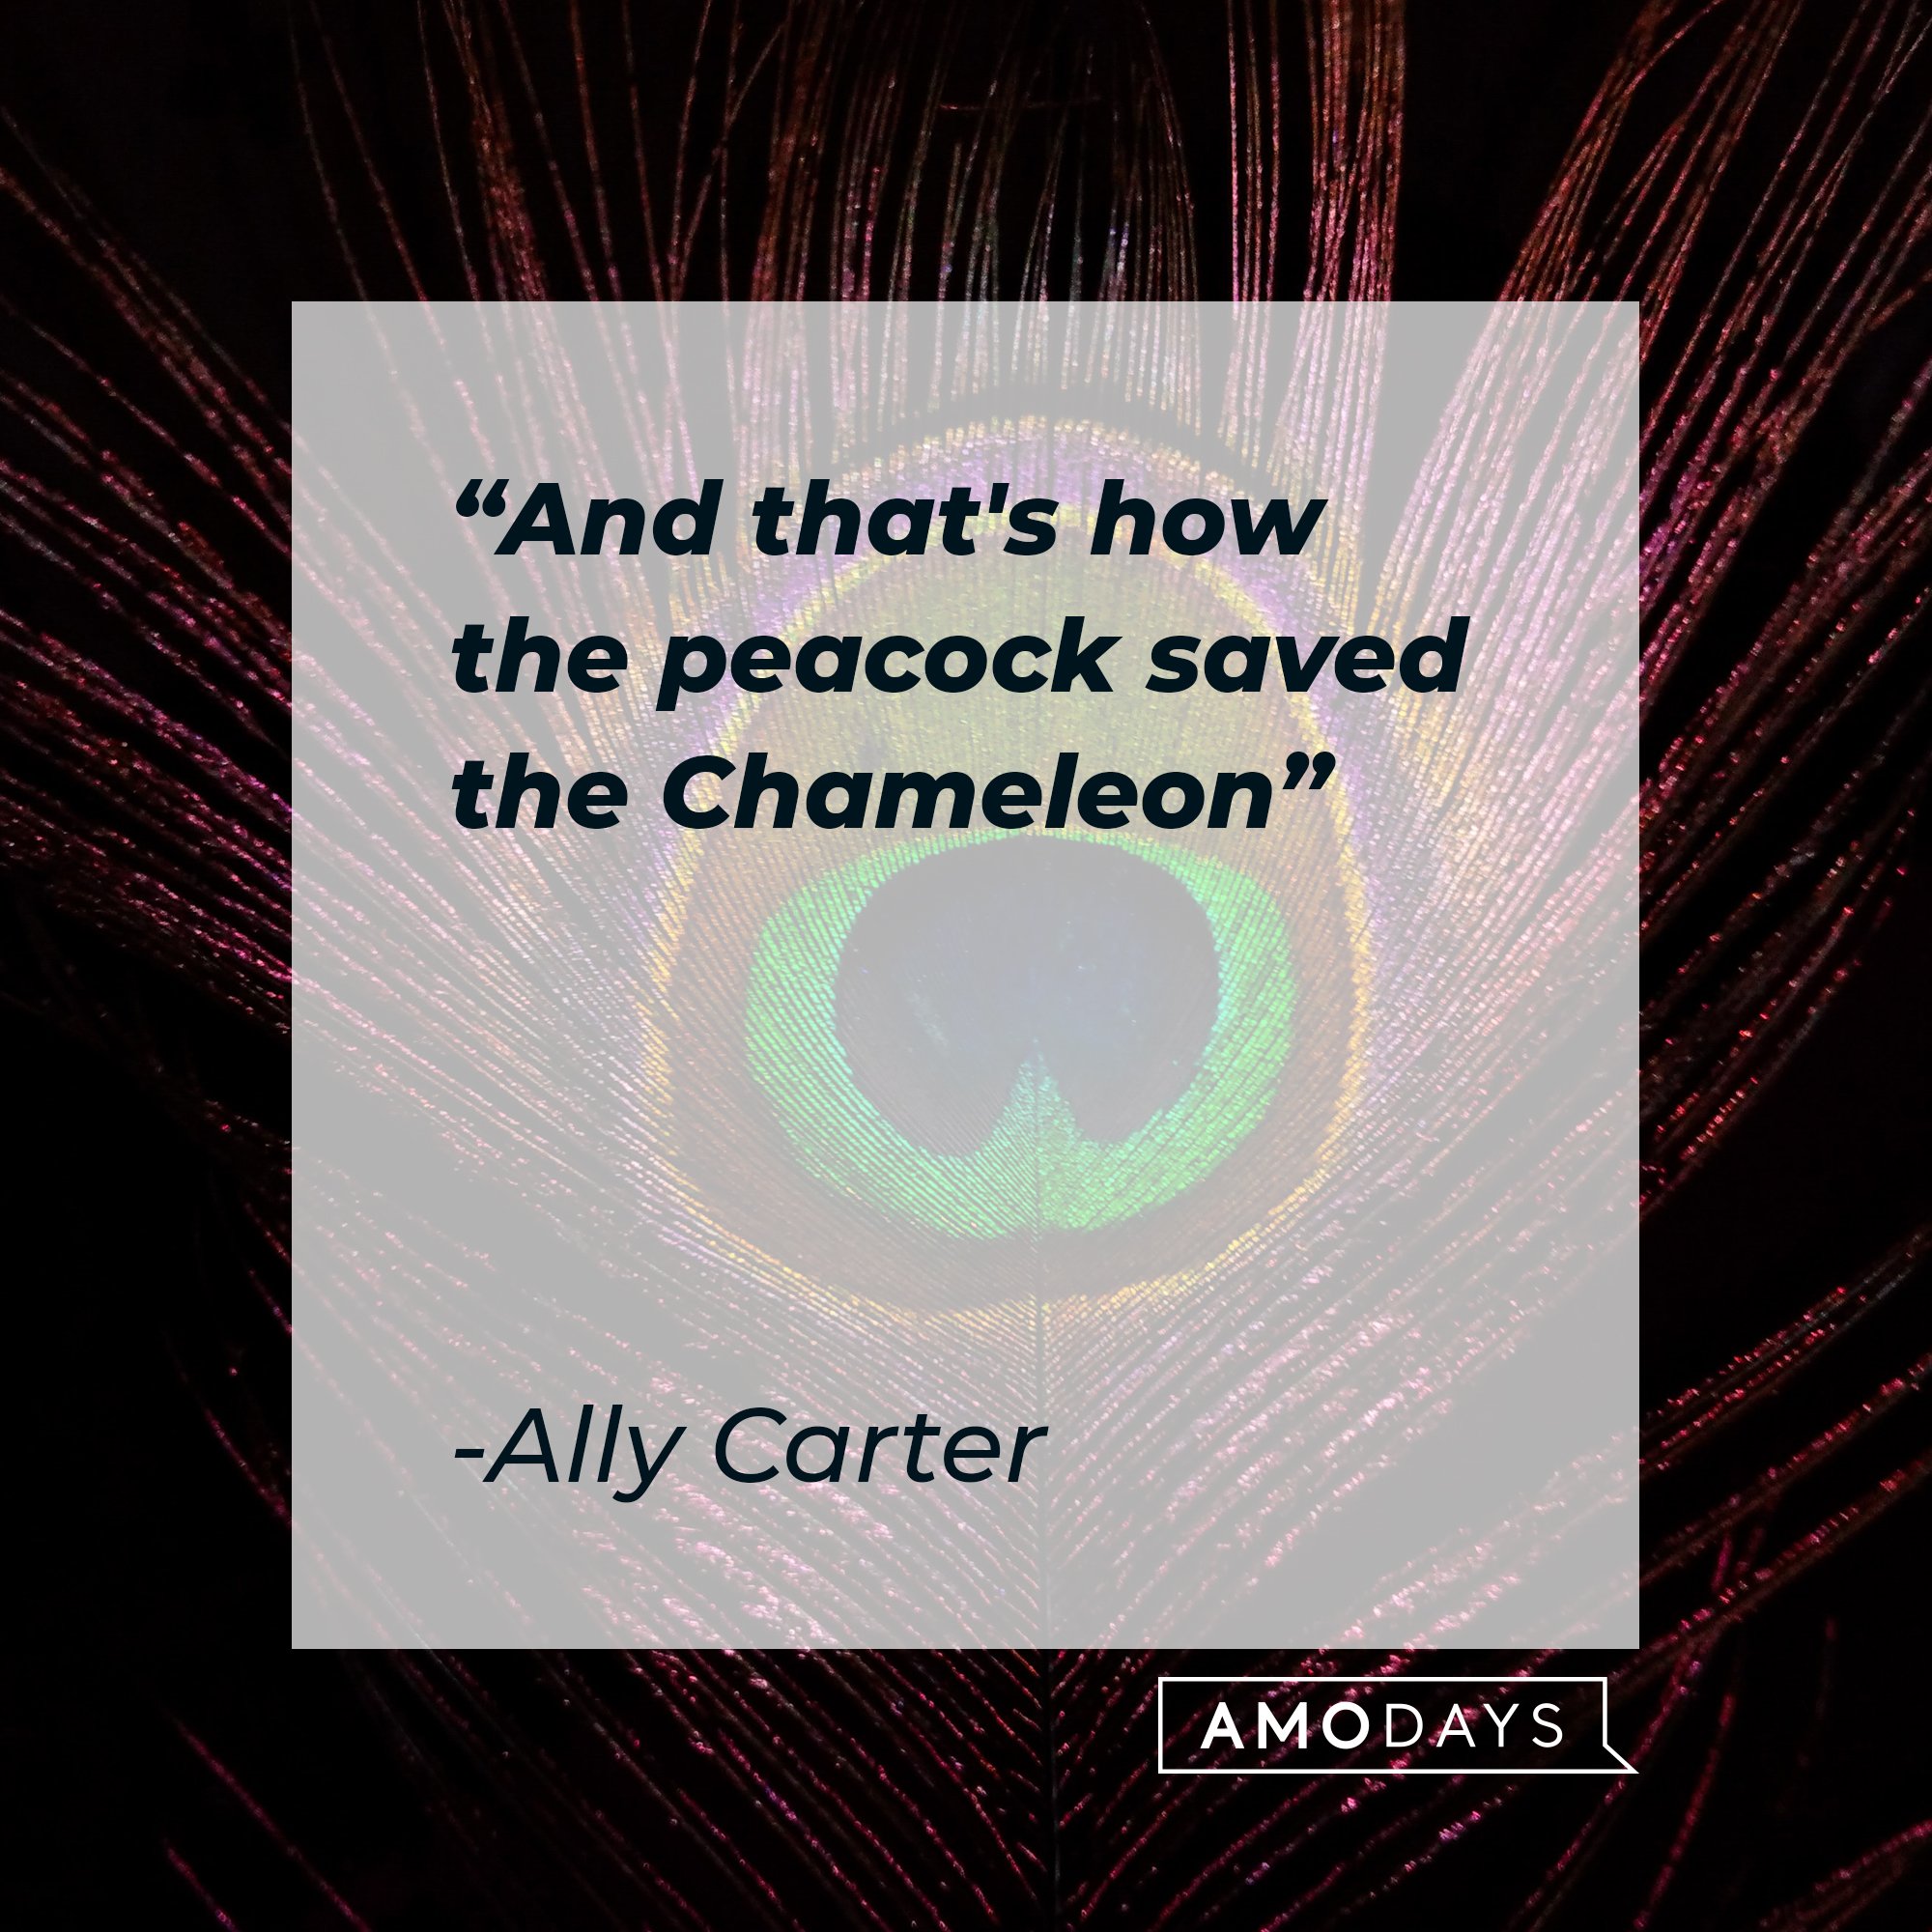 Ally Carter’s quote: "And that's how the peacock saved the chameleon" | Image: AmoDays